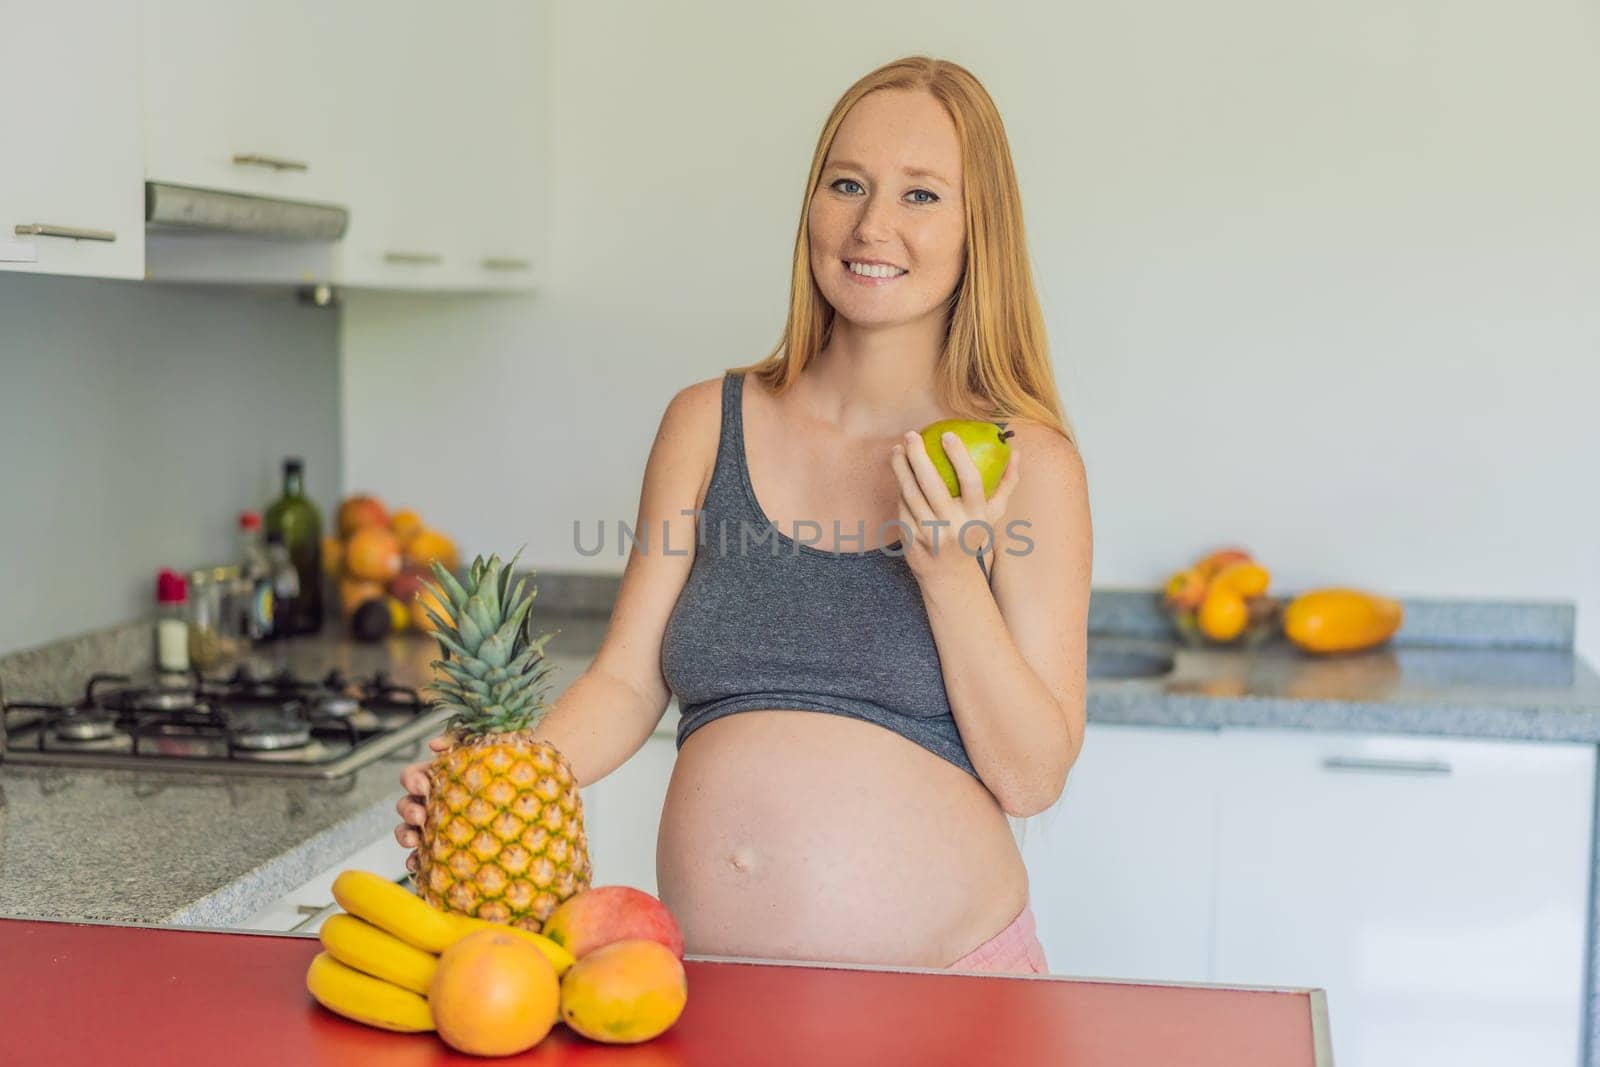 Embracing a healthy choice, a pregnant woman prepares to enjoy a nutritious moment, gearing up to eat fresh fruit and nourish herself during her pregnancy by galitskaya